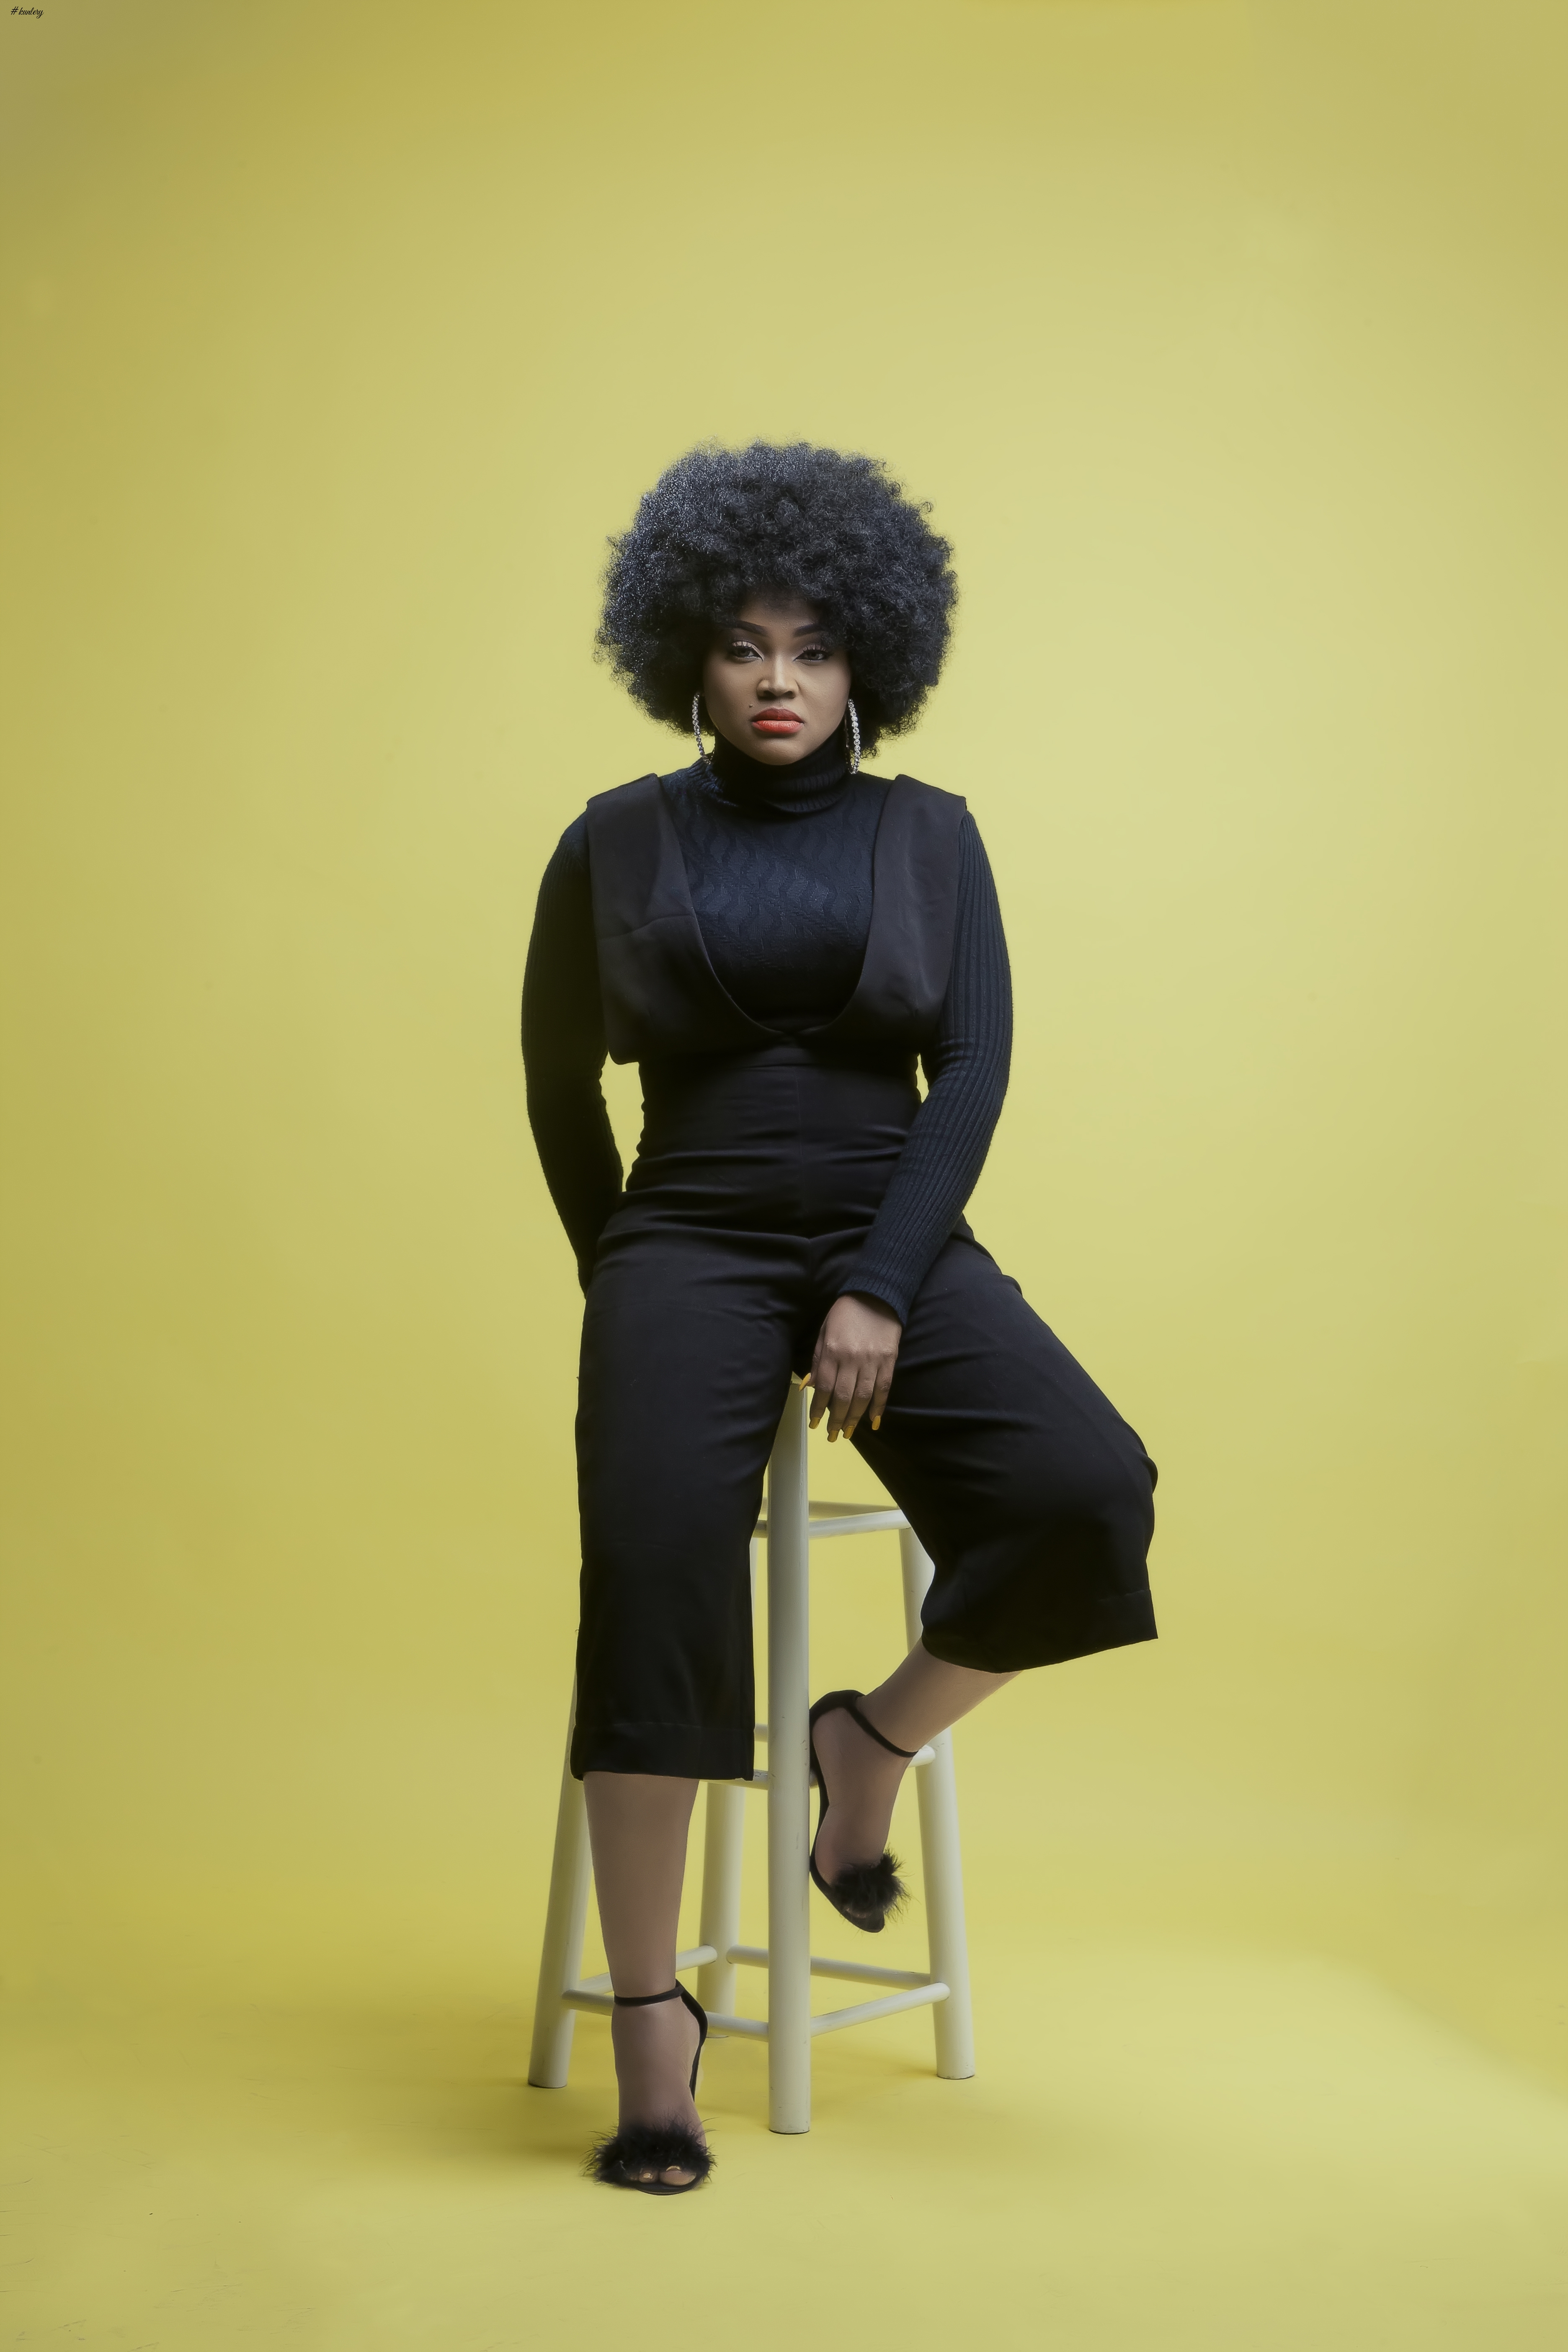 Move Over Beyonce! Check Out Photos Of Actress Mercy Aigbe-Gentry 70s & Vintage Inspired Looks